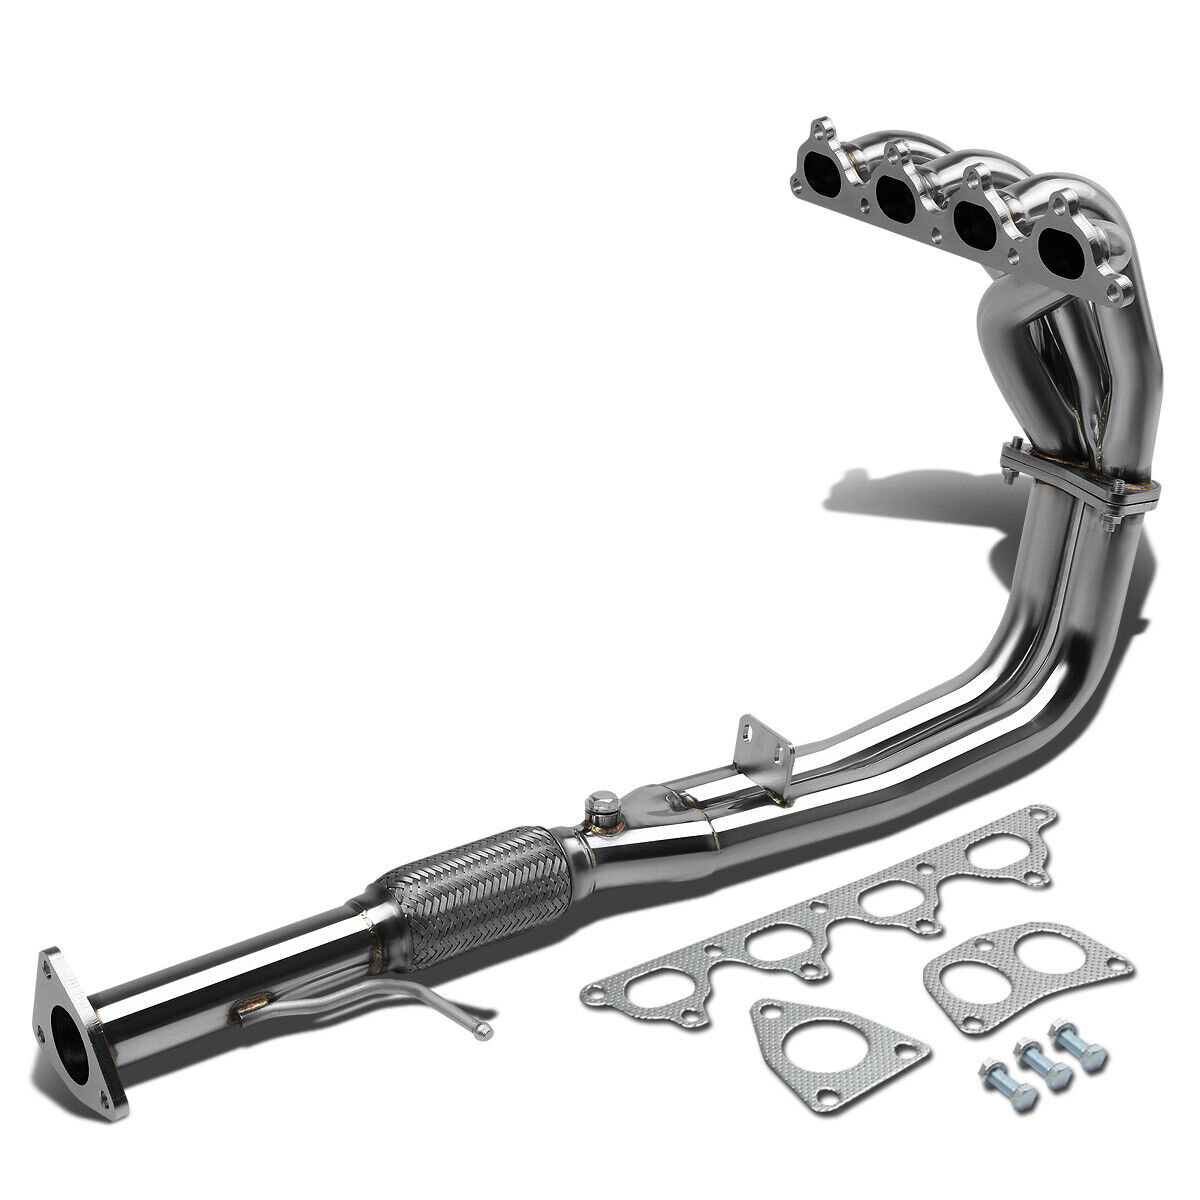 90-93 HONDA ACCORD SOHC F22 STAINLESS EXHAUST CHROME RACE HEADER+O2+GASKET+BOLTS